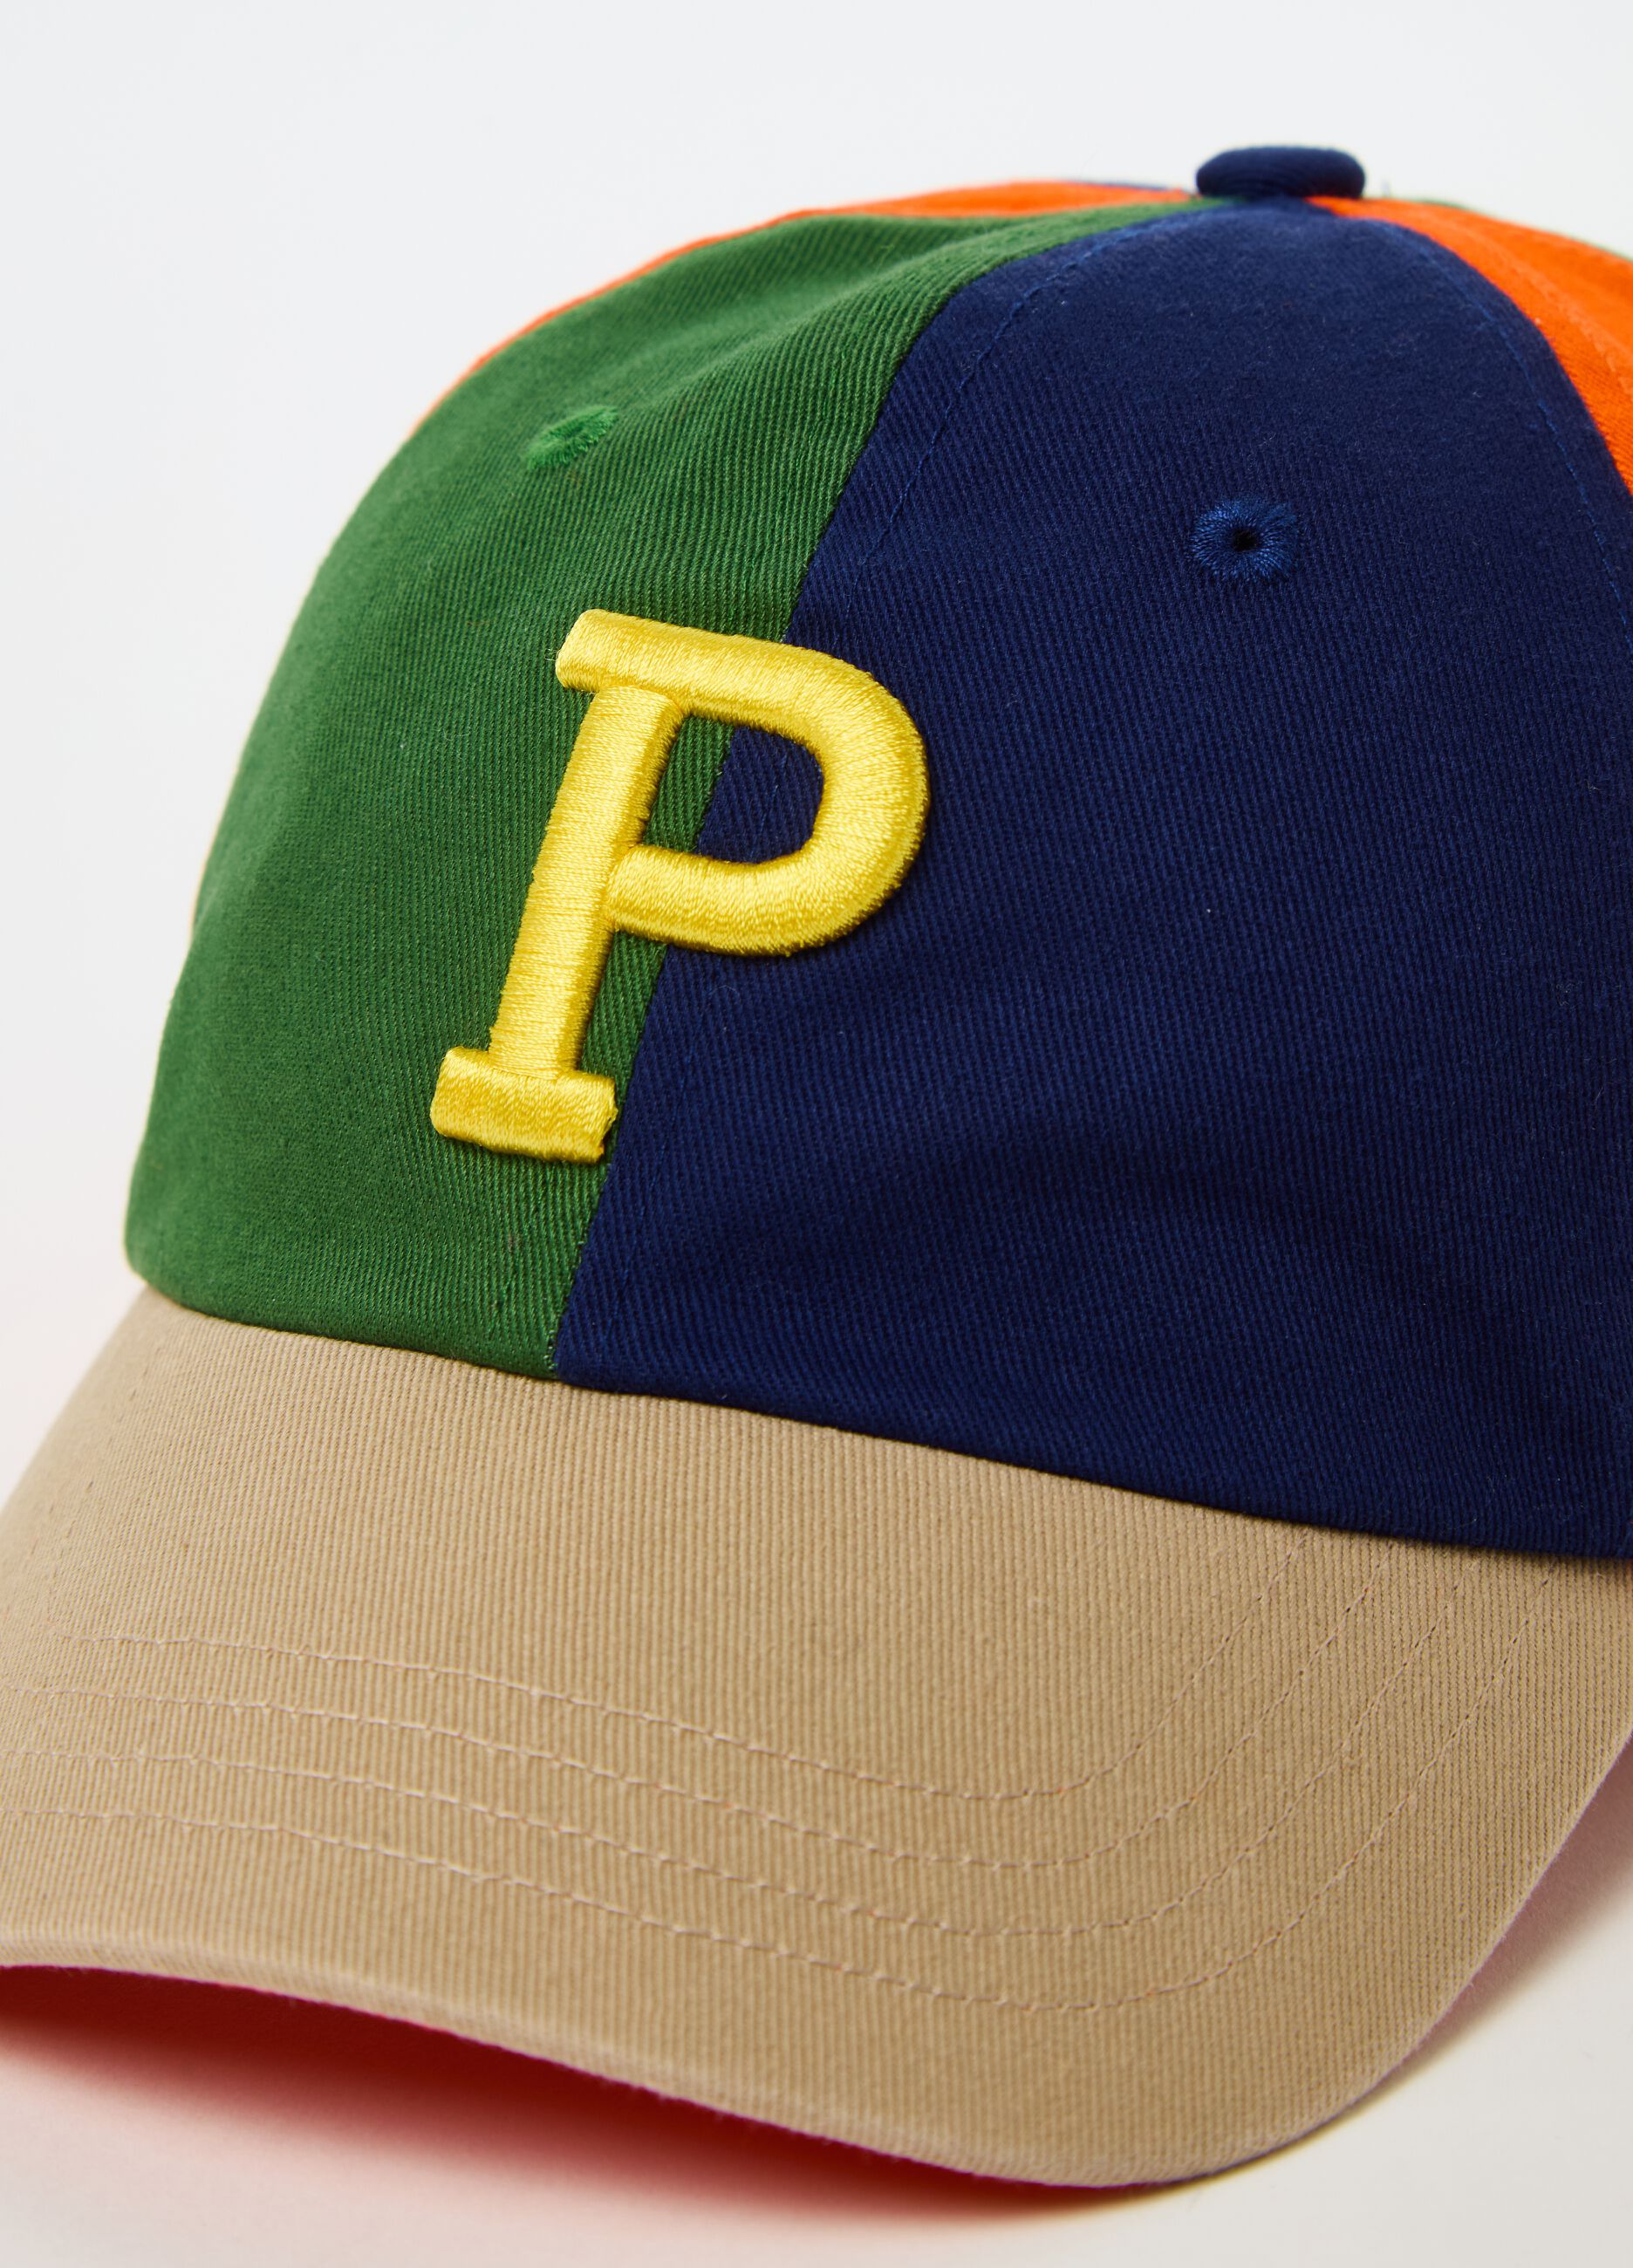 Baseball cap with embroidered logo